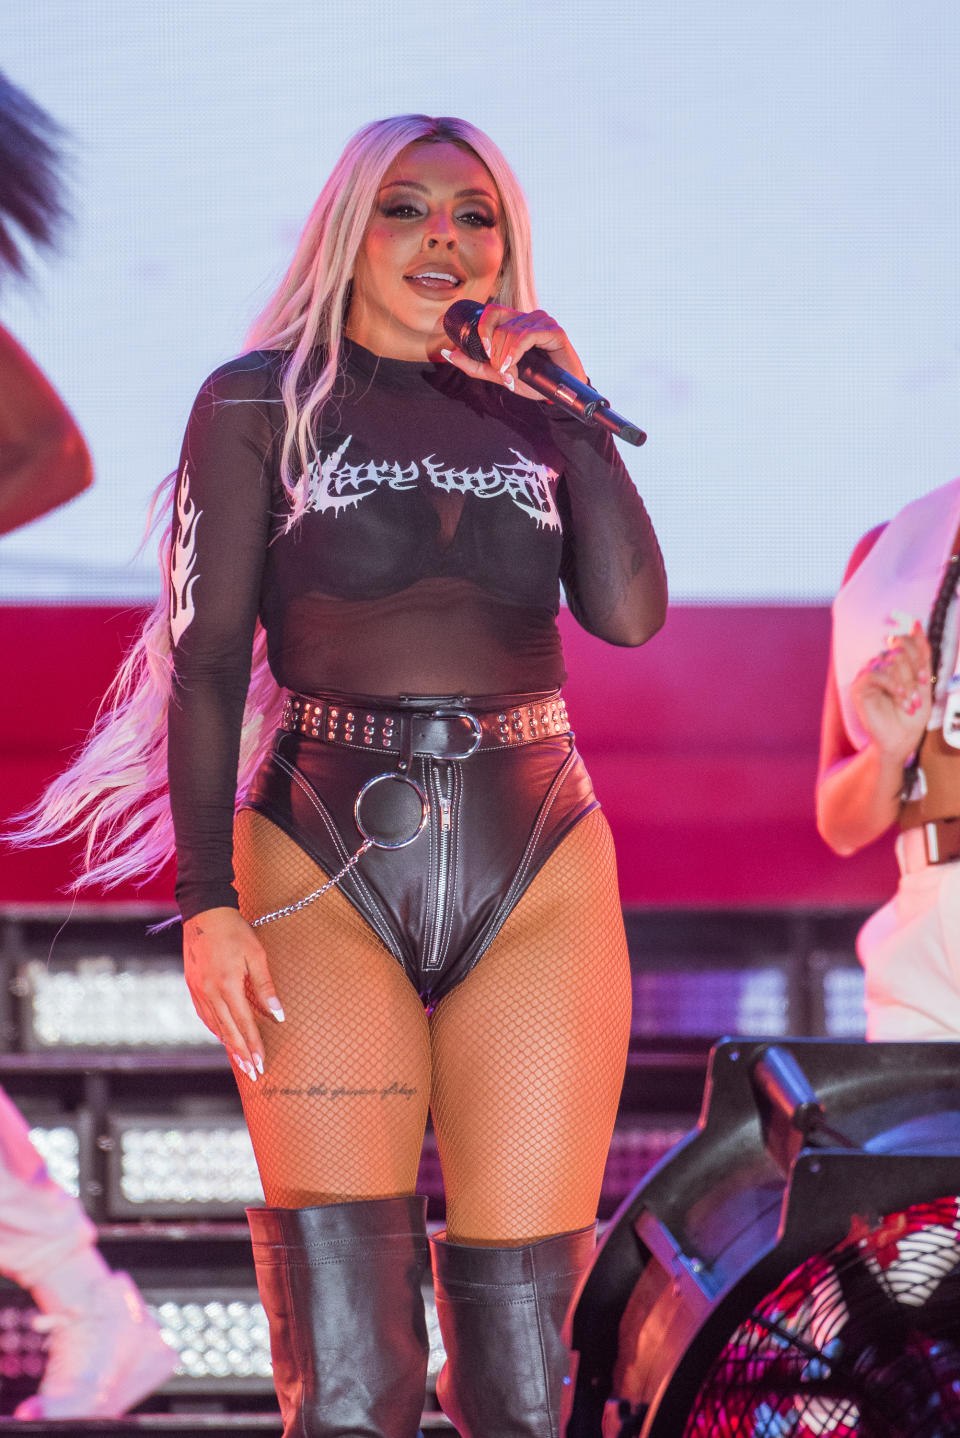 Jesy Nelson of Little Mix performs on stage during day 3 of Fusion Festival 2019 on September 01, 2019 in Liverpool, England.  (Photo by Joseph Okpako/WireImage)